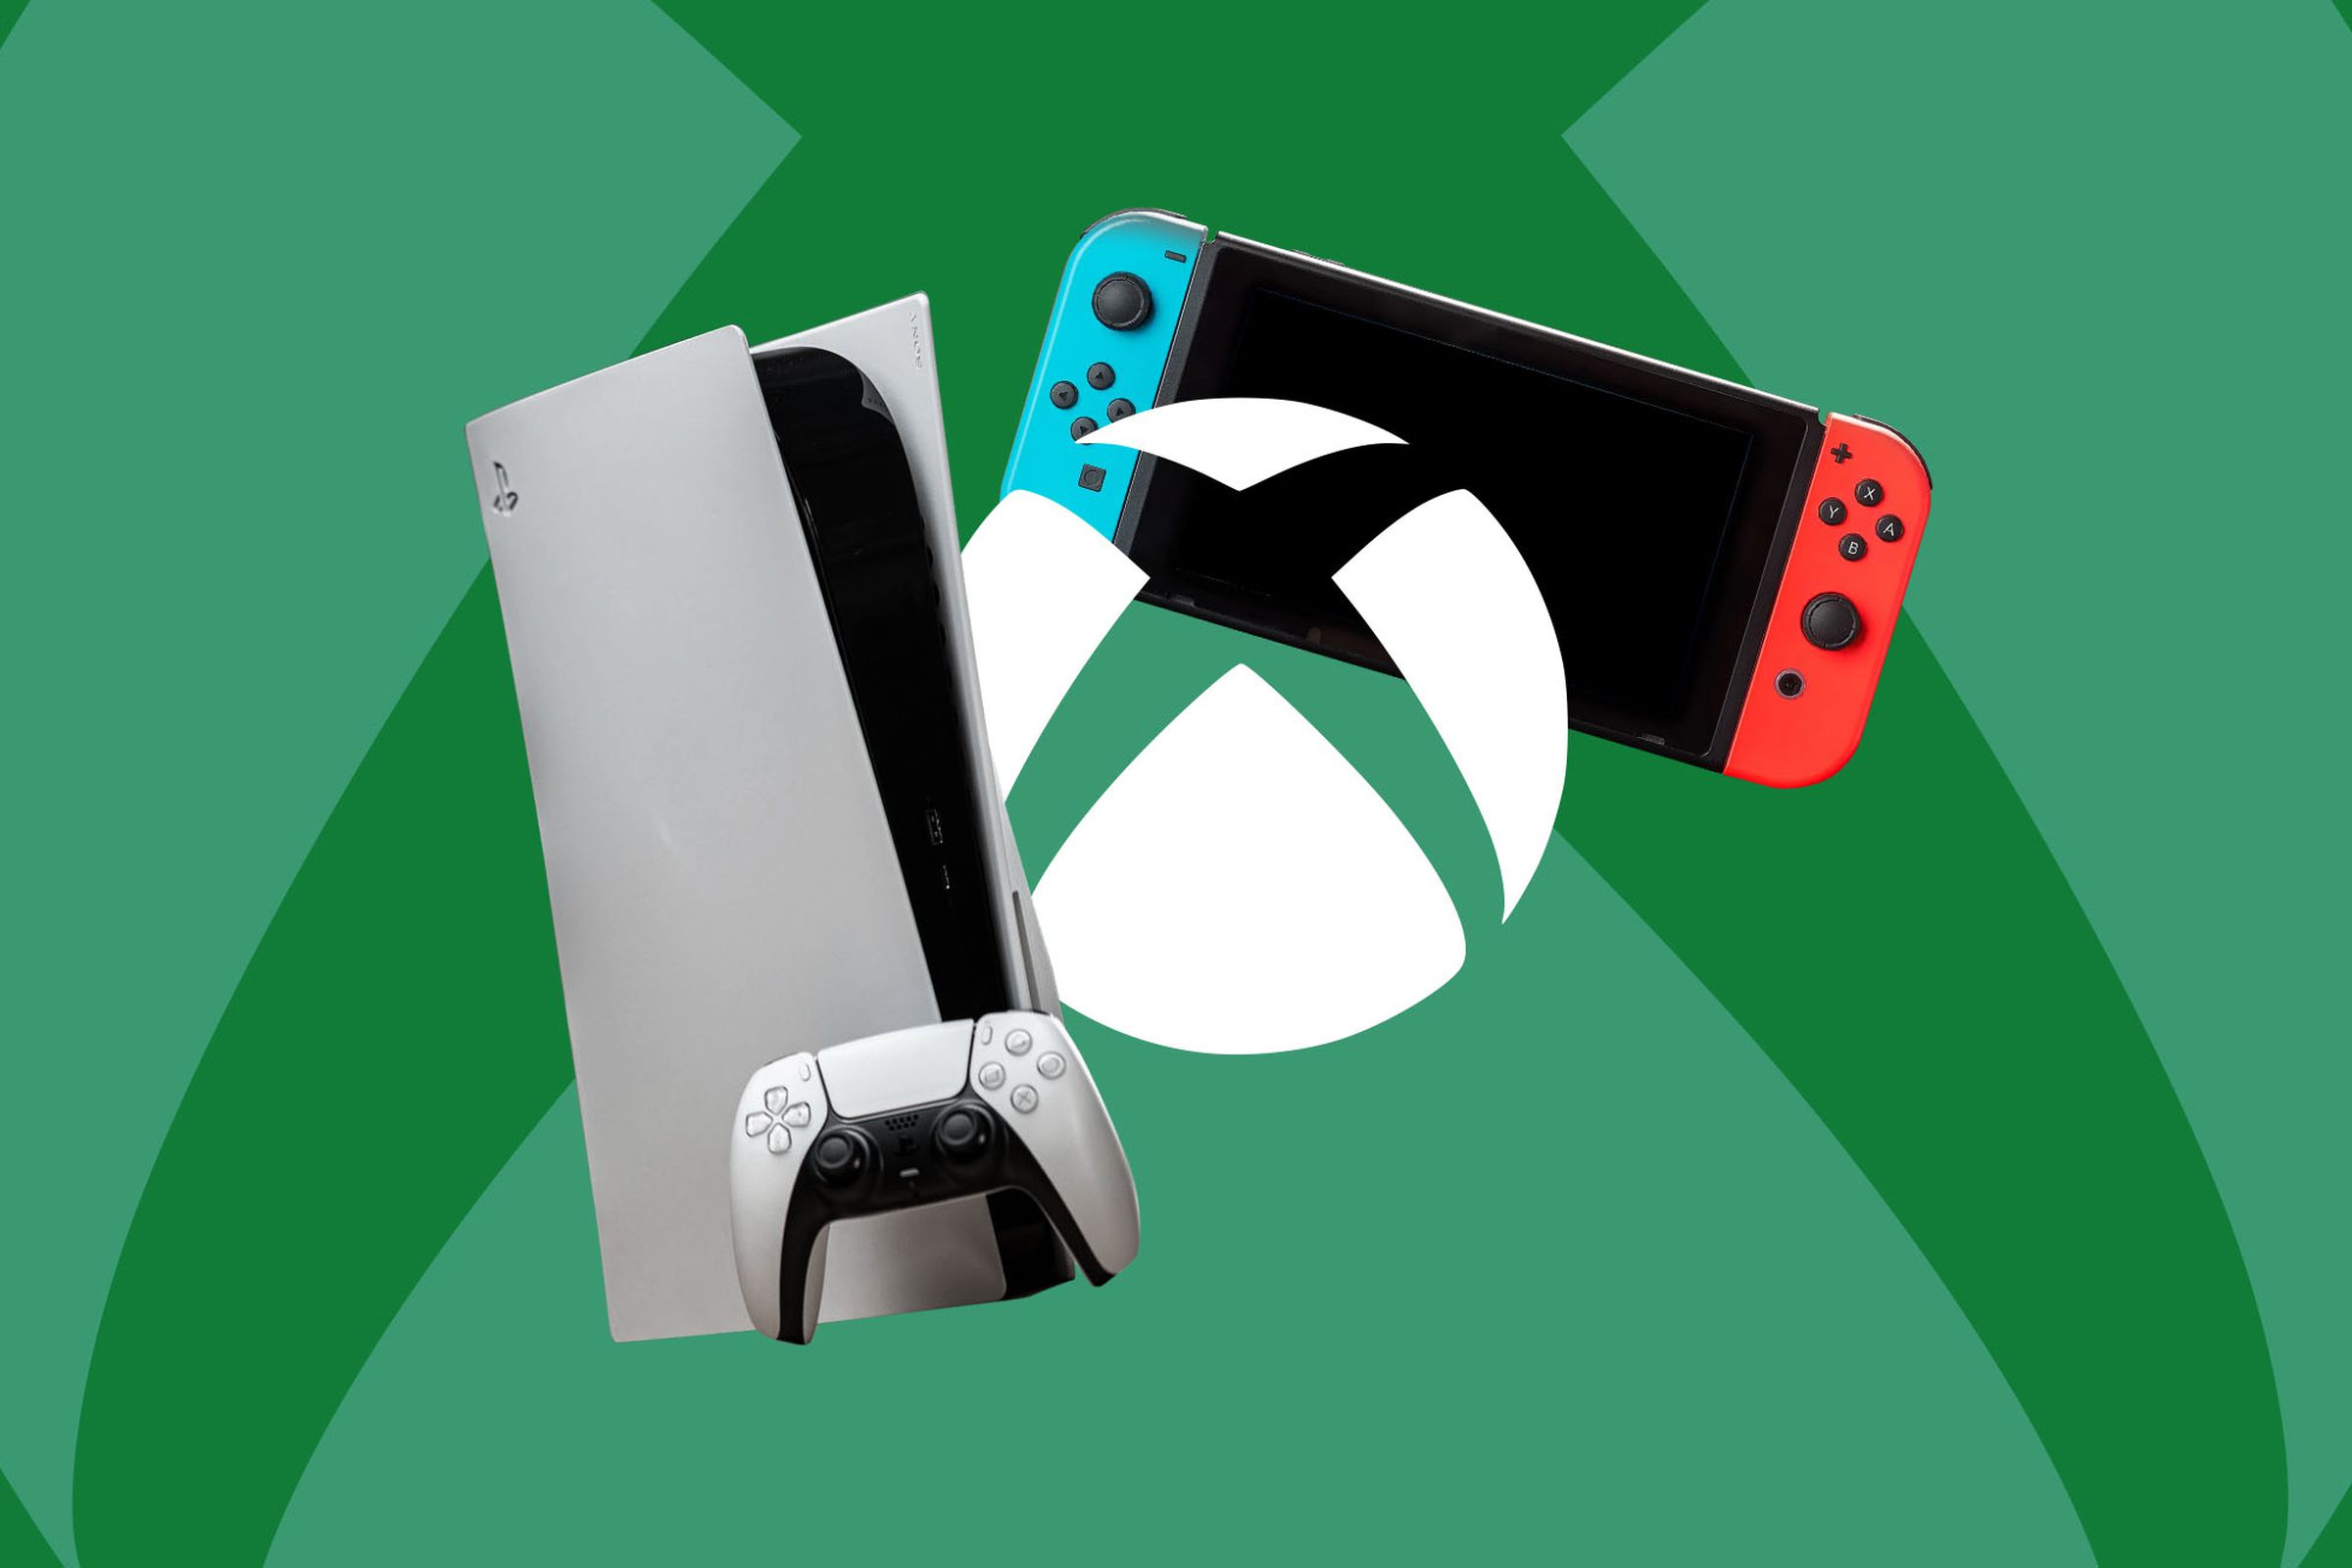 Illustration of a PS5 and a Nintendo Switch next to the Xbox logo.